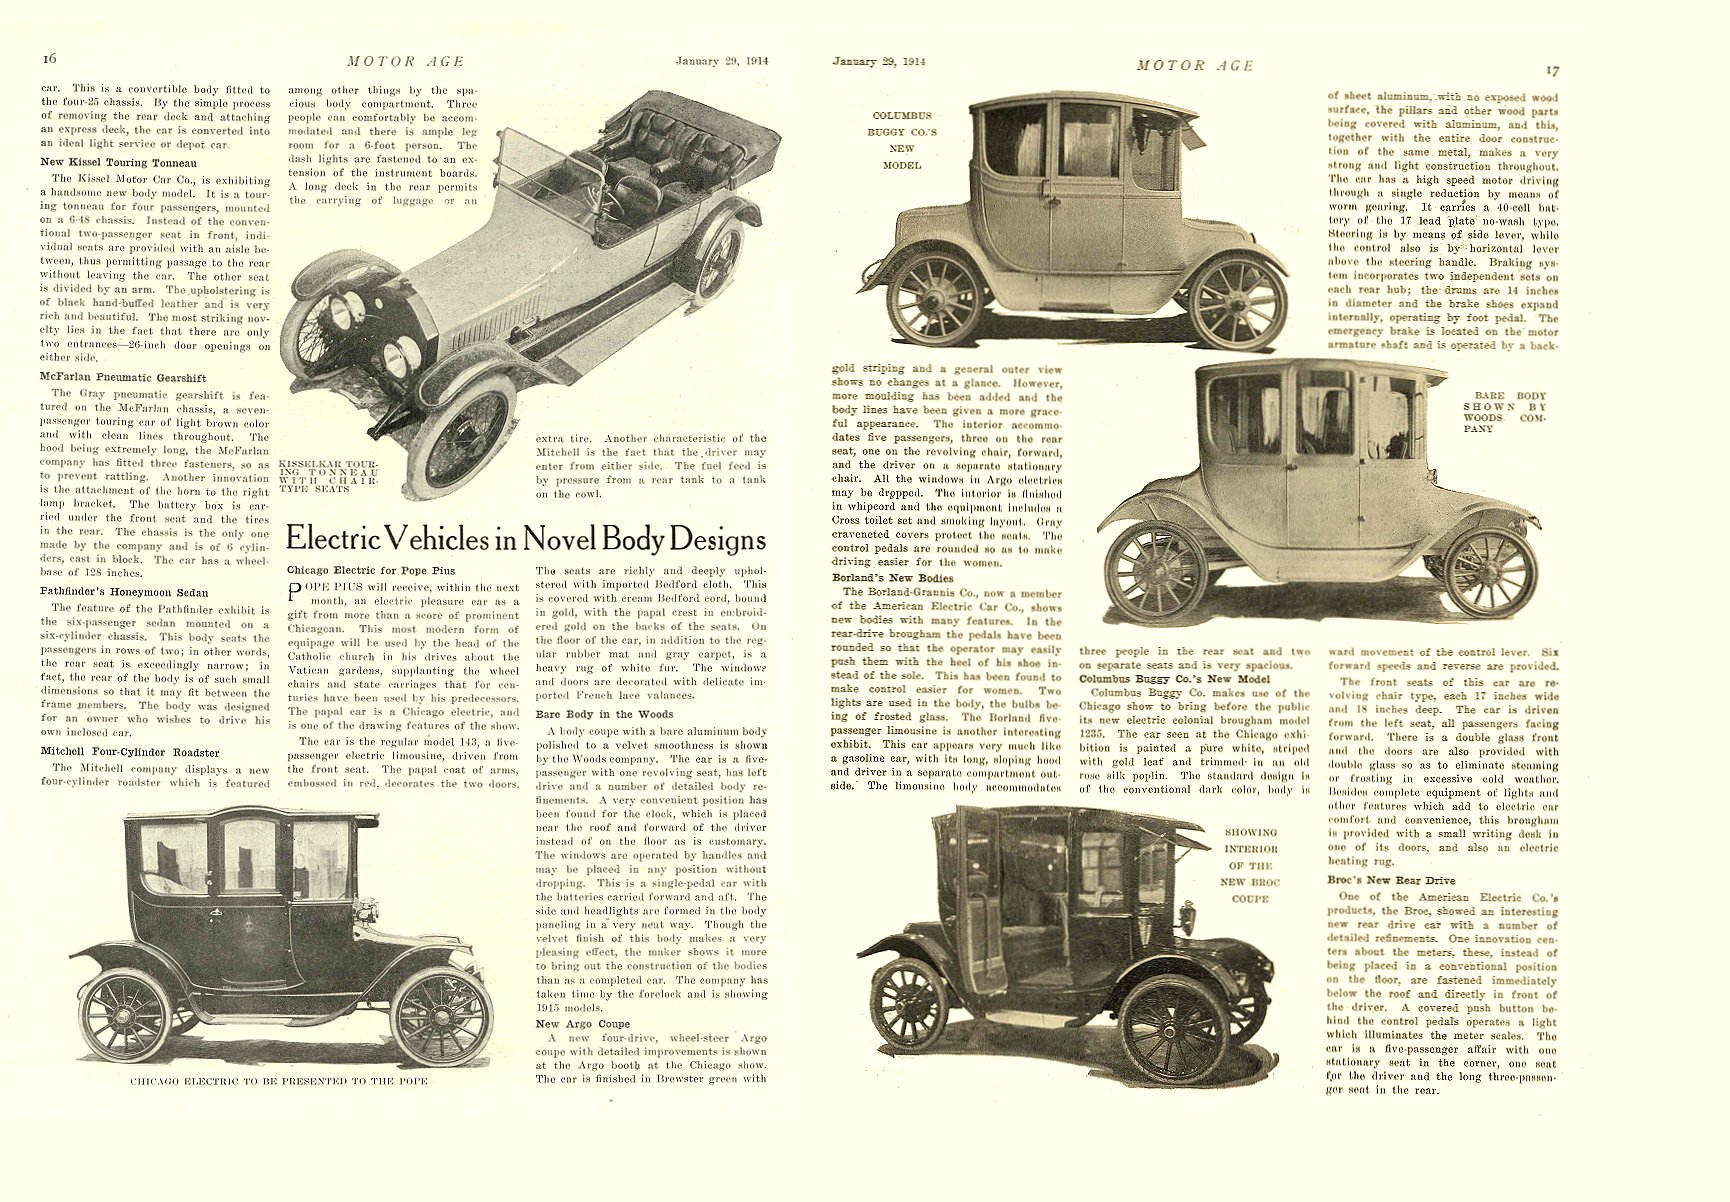 1914 1 29 ARGO Electric Article Electric Vehicles in Novel Designs Argo Electric Vehicle Company Saginaw, MICH MOTOR AGE January 29, 1914 8.5″x11.75″ pages 16 & 17